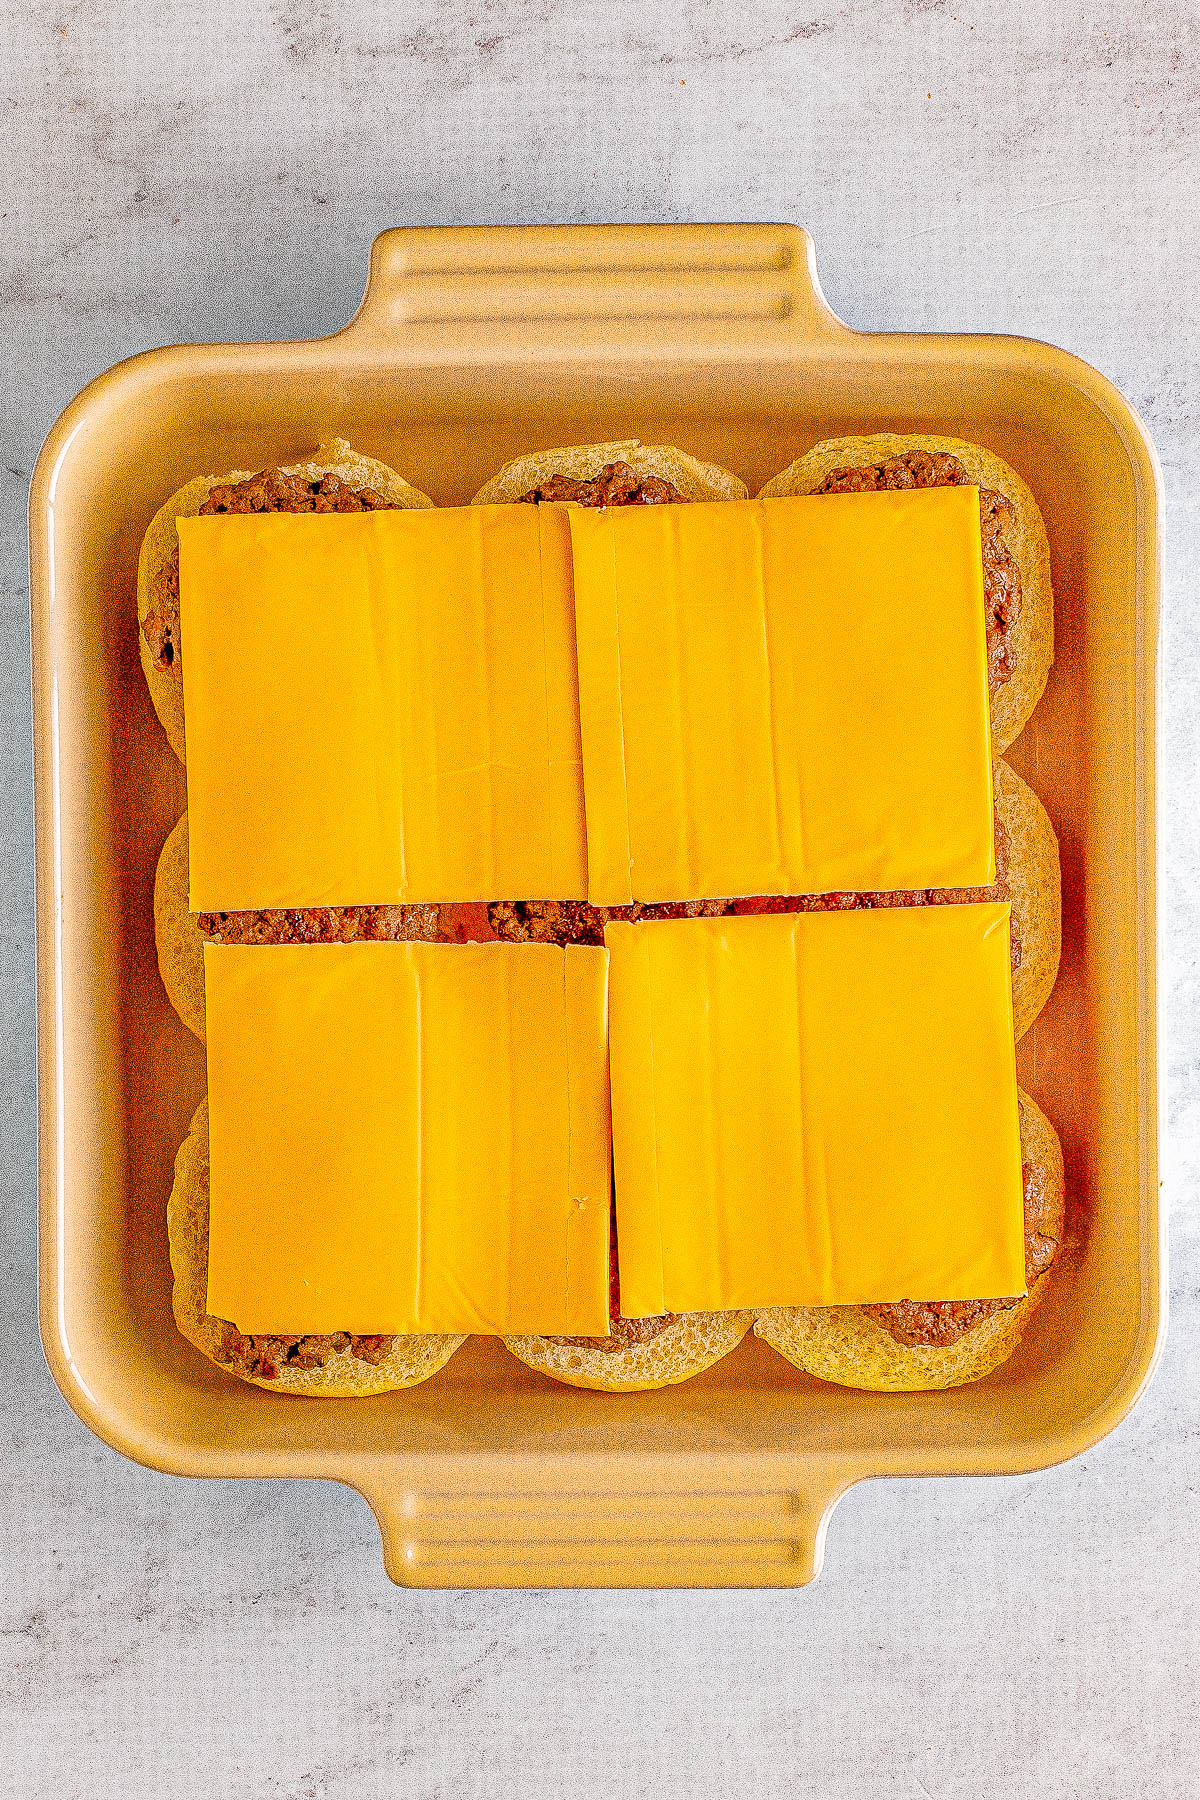 Big Mac Sliders - For anyone who likes the restaurant version, you're going to LOVE this homemade big mac copycat recipe in handheld slider form! Complete with a COPYCAT big mac special sauce, melted cheese, pickles, and tender beef all nestled between soft buttery buns. These EASY sandwiches are a family favorite FAST dinner recipe or make them for events, holidays, or game day parties!